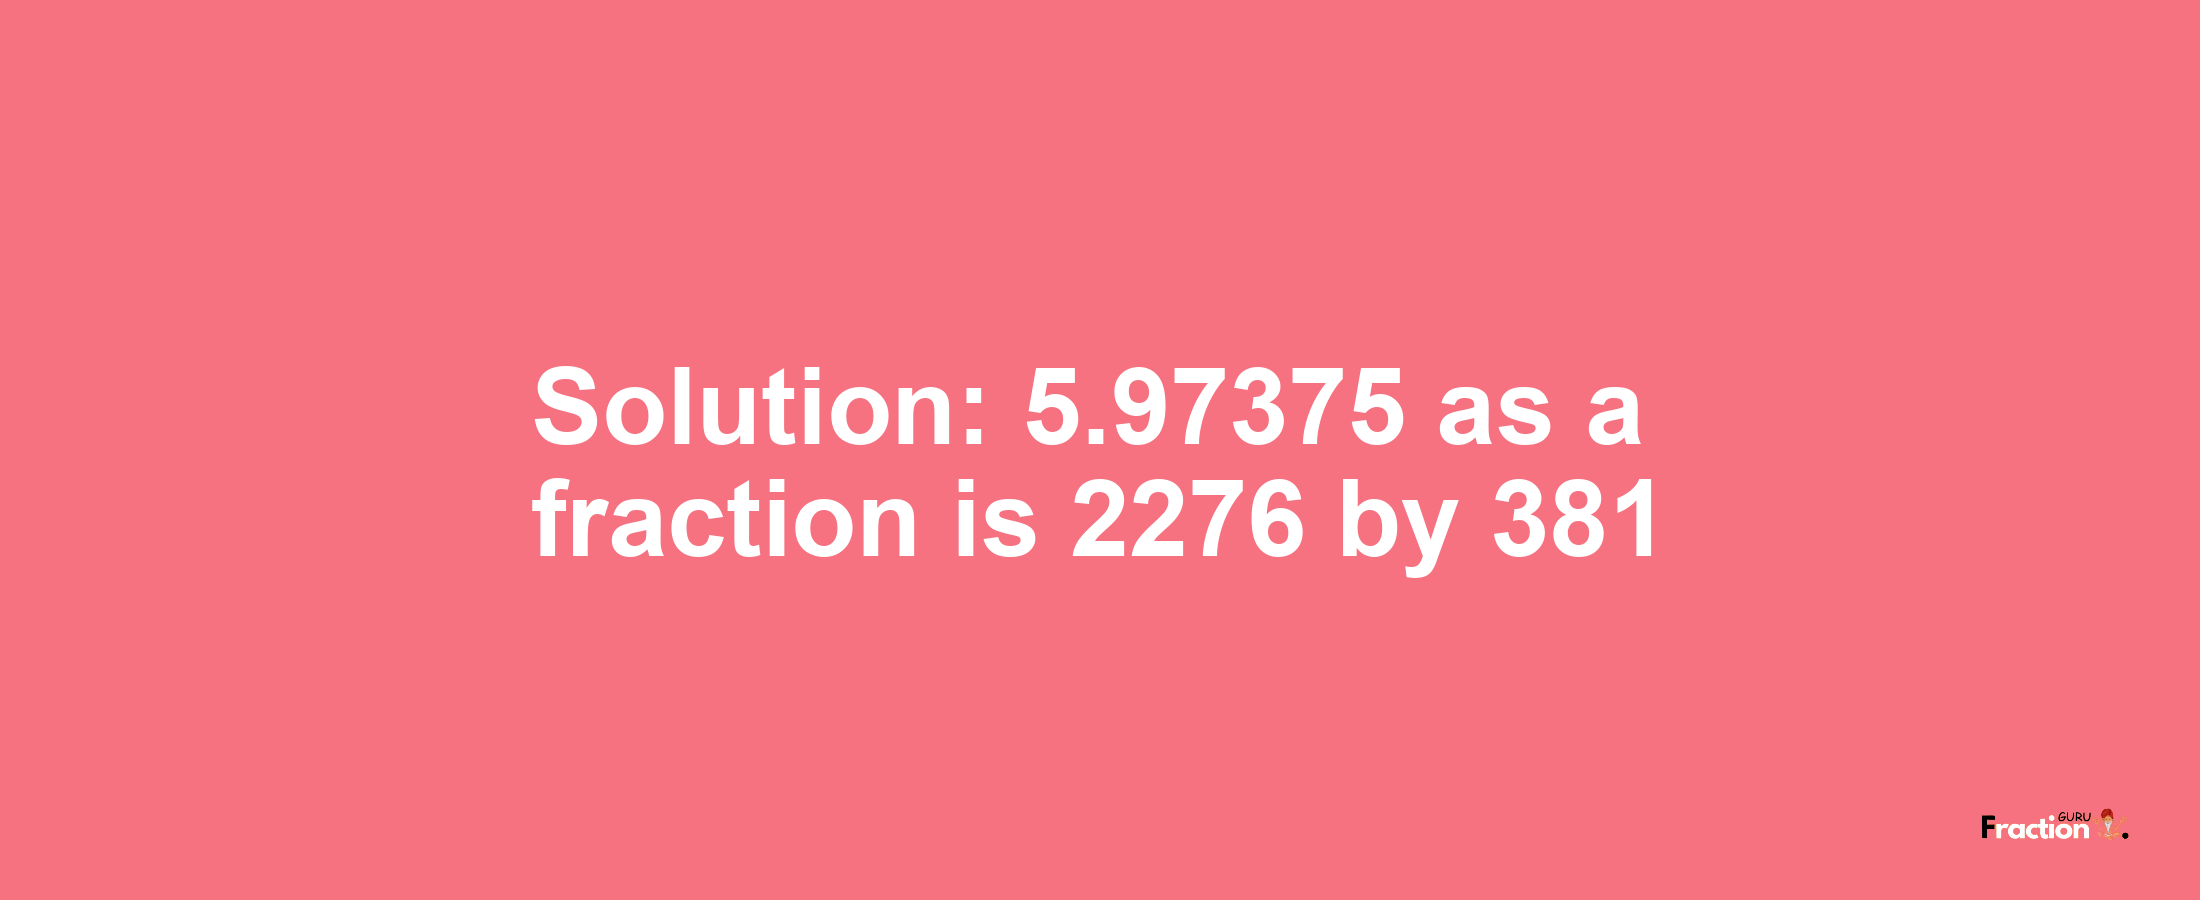 Solution:5.97375 as a fraction is 2276/381